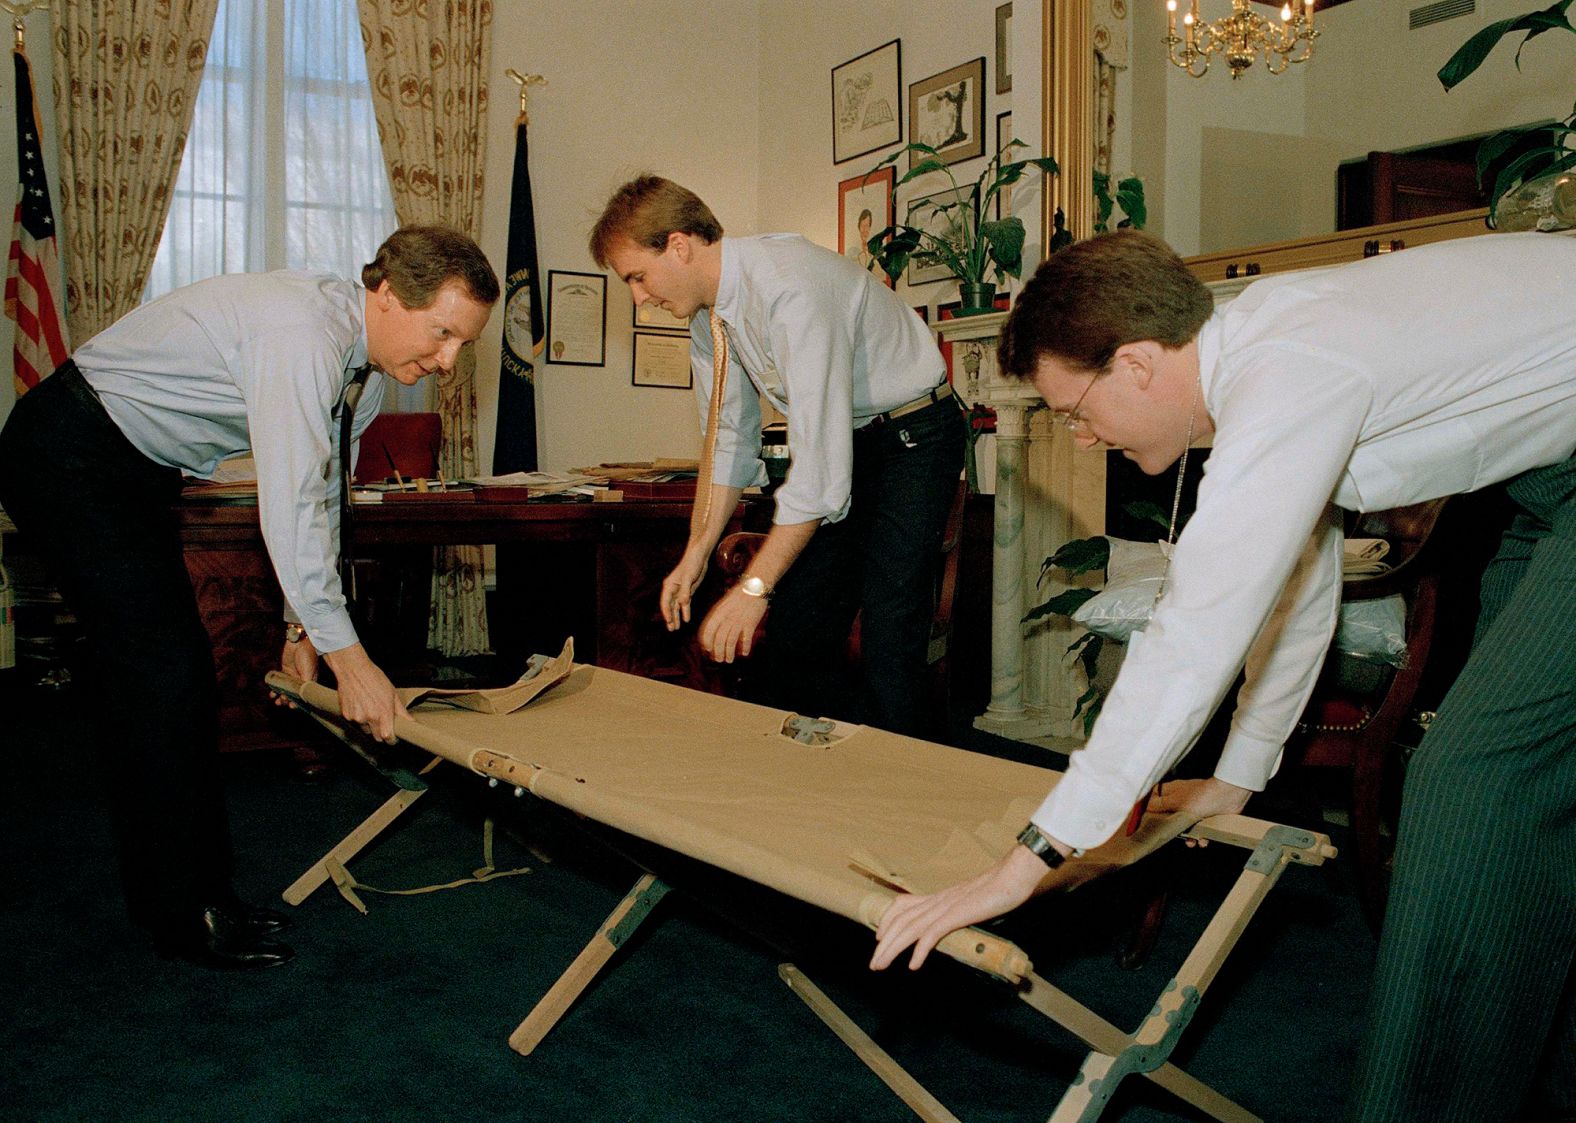 McConnell, left, and aides Steve Johnson, center, Mike Mitchell set up a cot in the senator's office as they prepare for another night of a Senate filibuster in February 1988. Republicans were filibustering against campaign spending legislation.